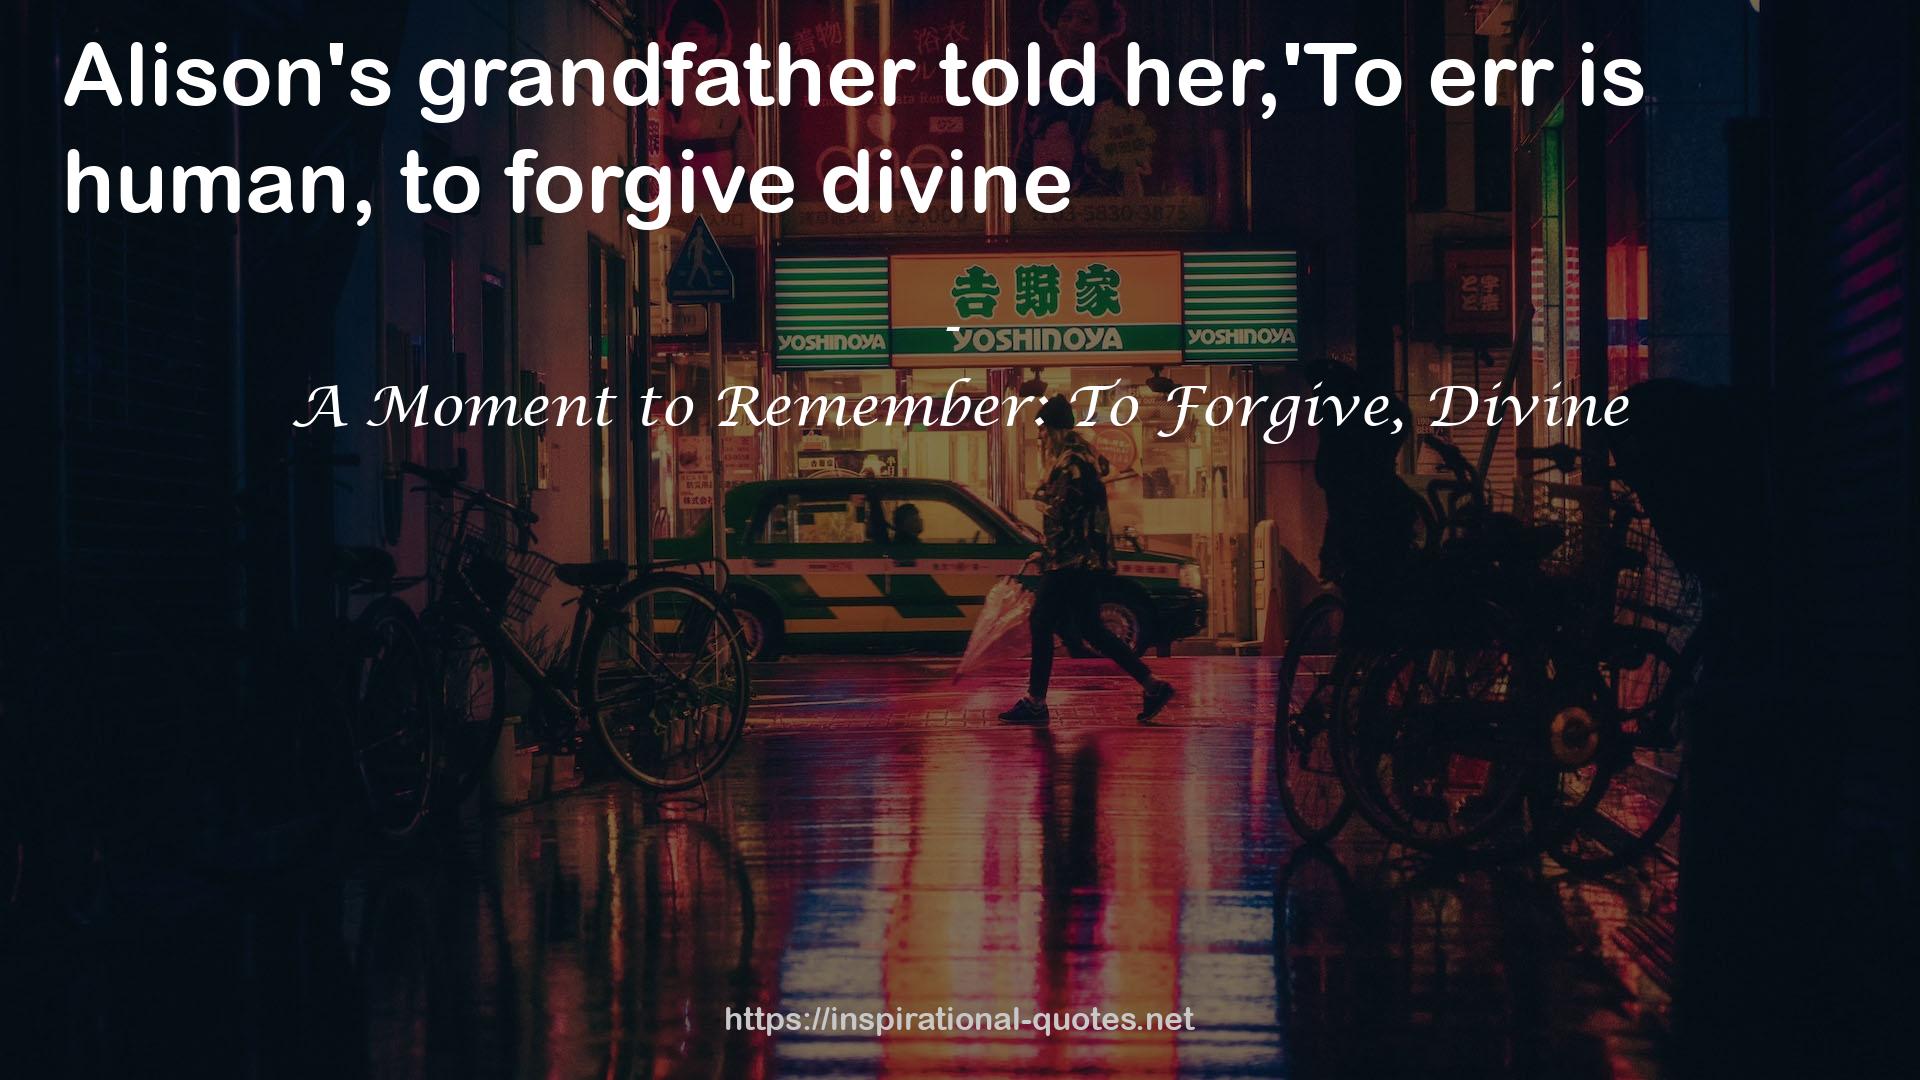 A Moment to Remember: To Forgive, Divine QUOTES